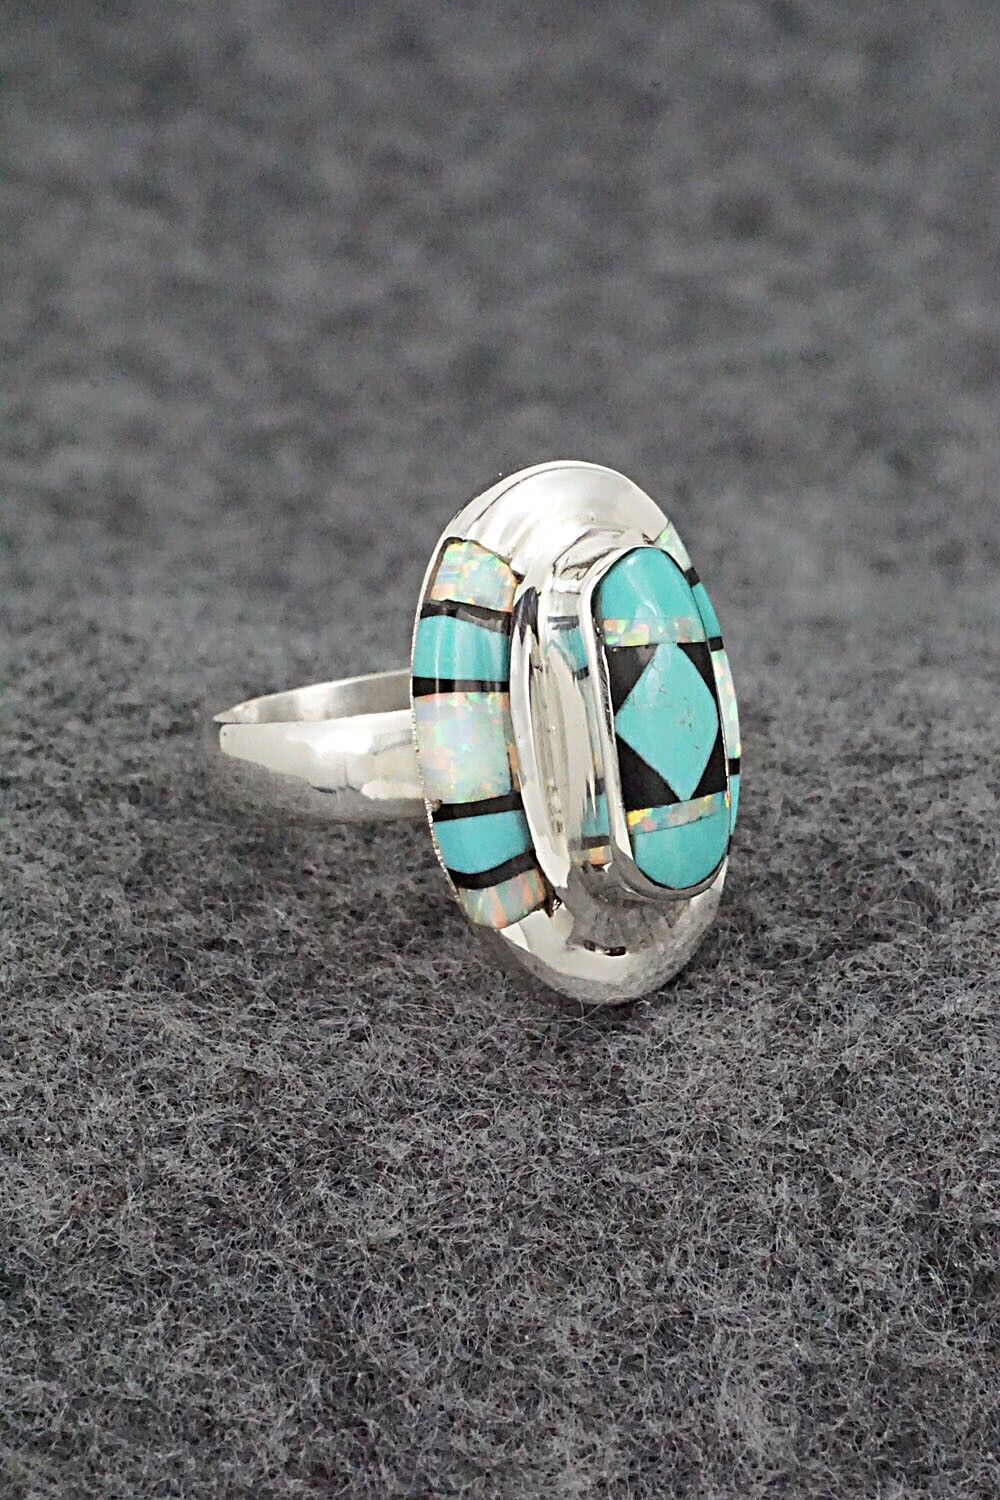 Turquoise, Onyx, Opalite & Sterling Silver Ring - Ophelia Panteah - Sz. 6.75